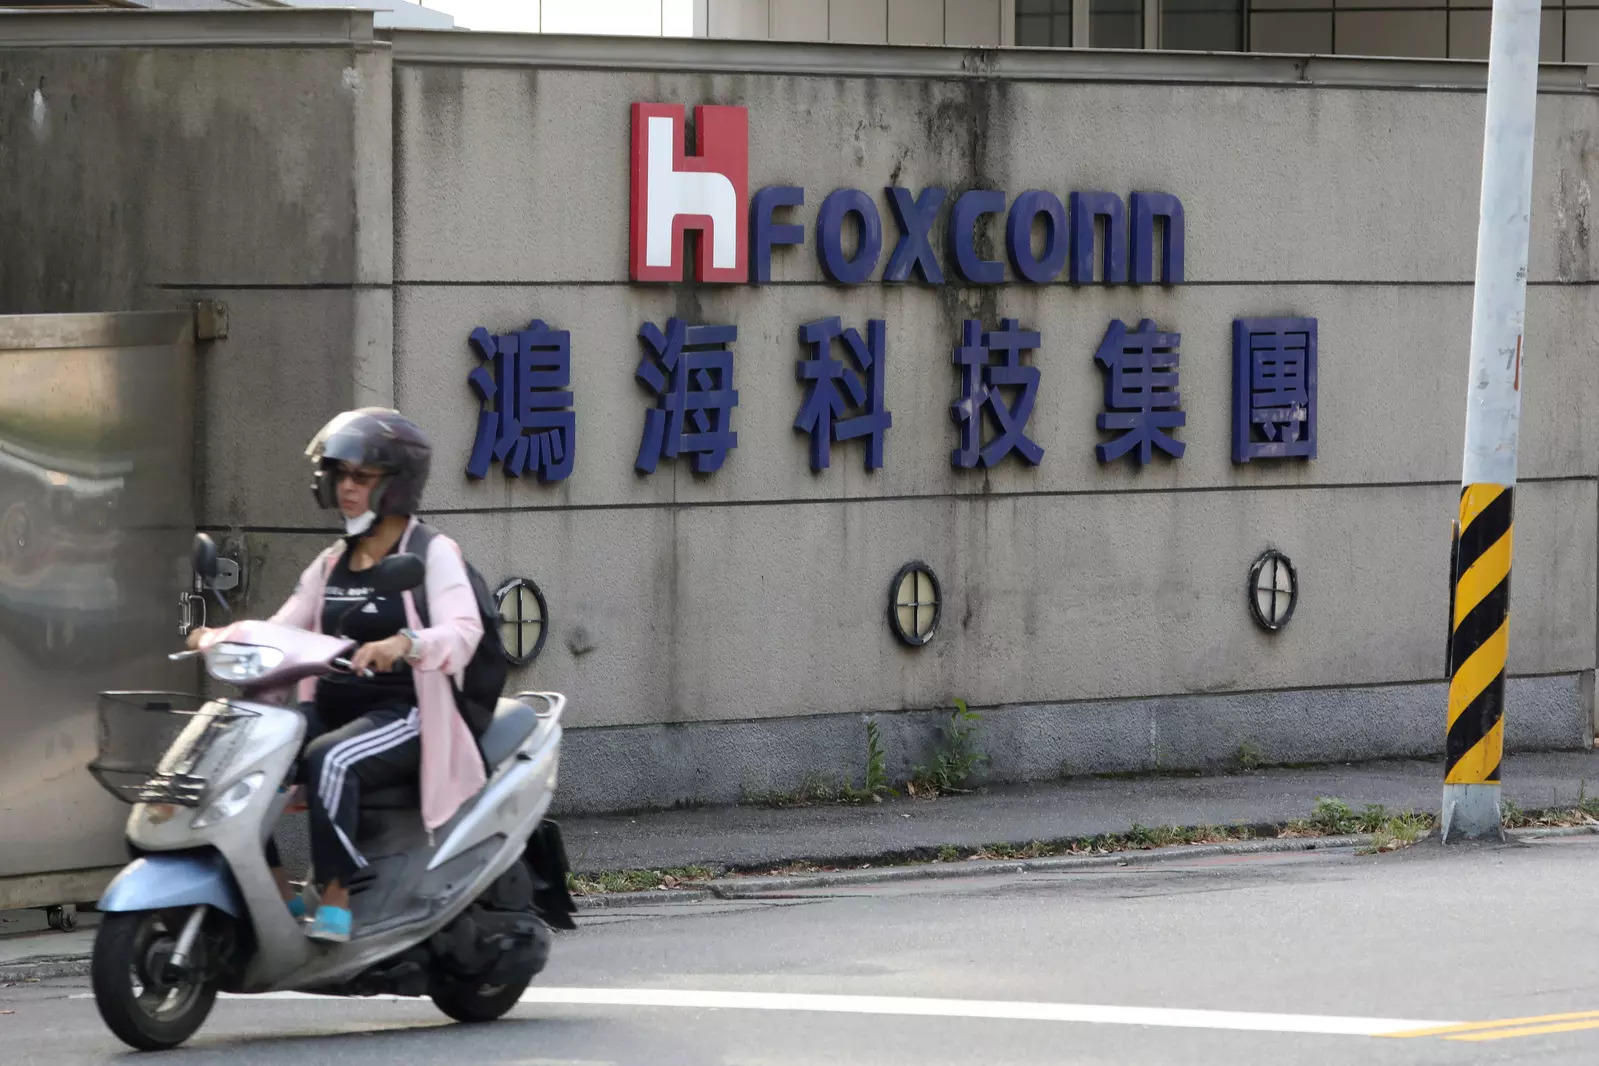  FILE PHOTO: FILE PHOTO: A motorist passes by a Foxconn office building in Taipei, Taiwan, July 14, 2020. REUTERS/Ann Wang/File Photo/File Photo